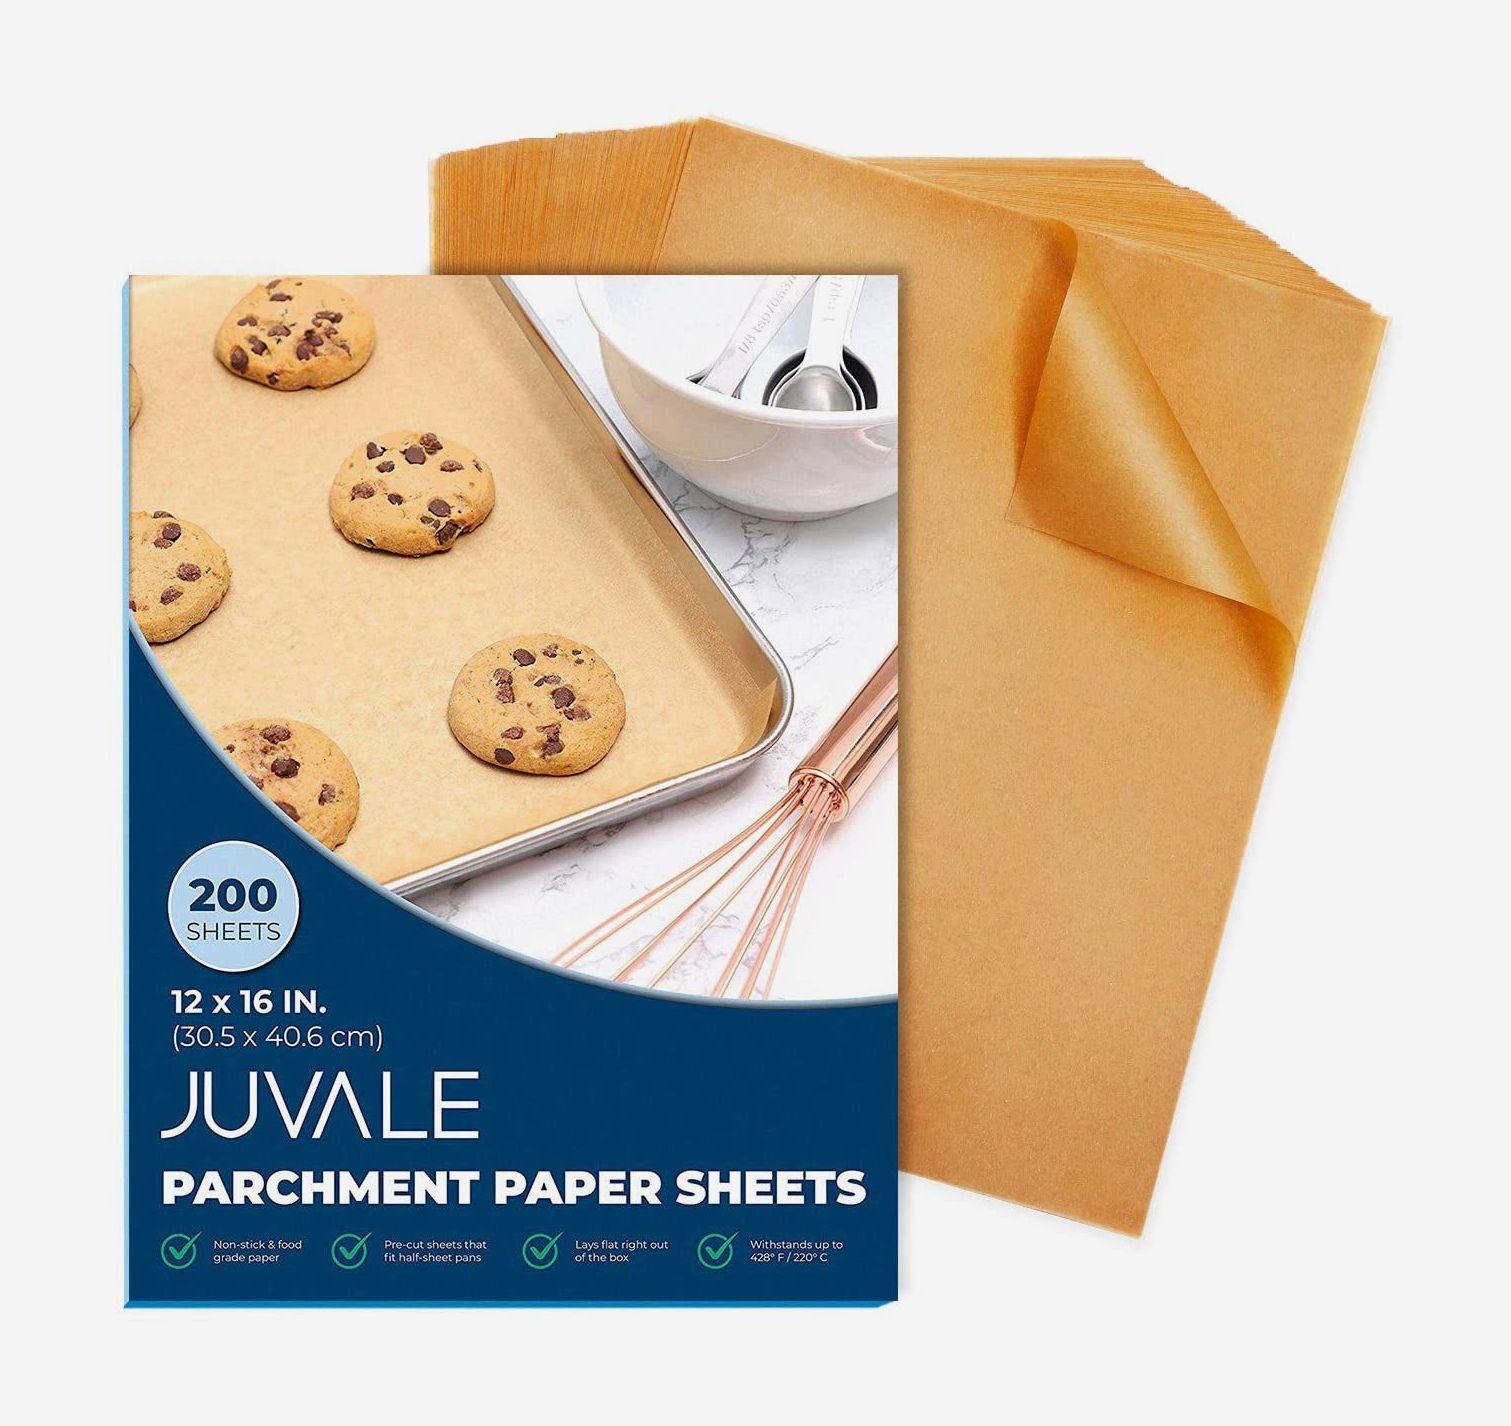 Ultra Heavy-Duty Non-Stick Parchment Paper Sheets - 12 x 16 IN